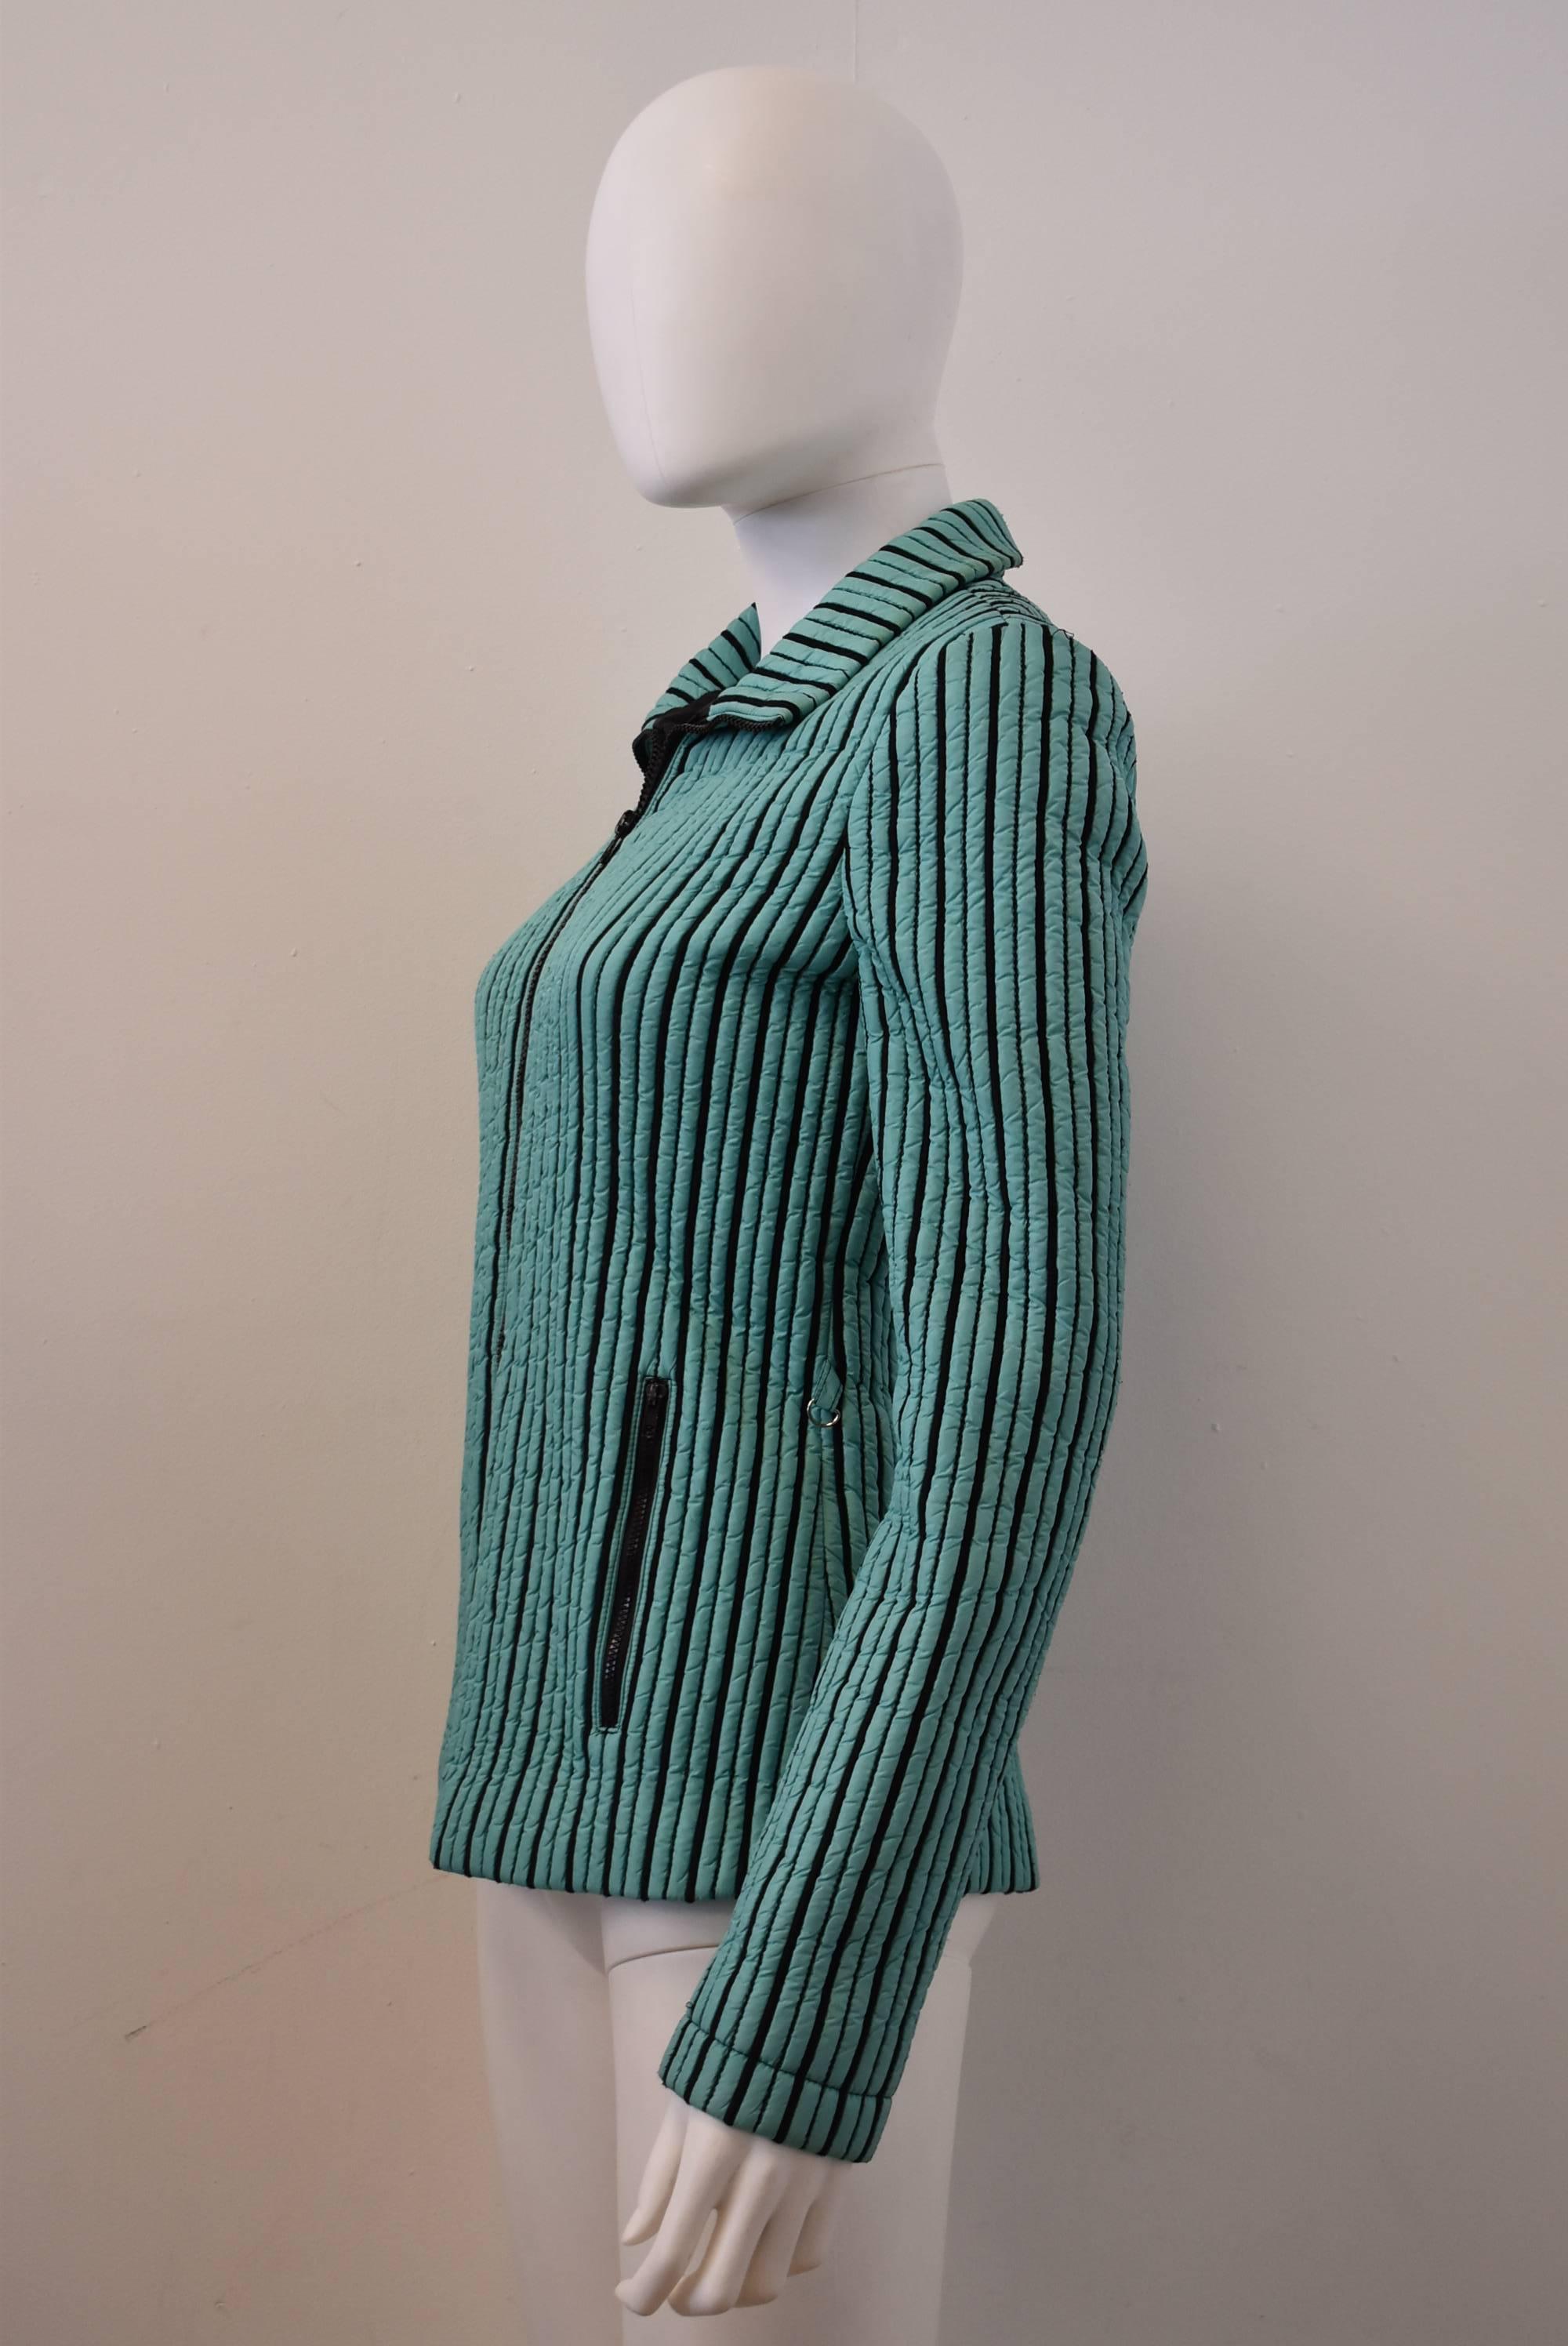 A green turquoise and black ‘striped’ jacket created using piping and stitching techniques. The jacket has a simple, short shape with a zip front fastening and two zip-close pockets at the hip. The jacket is made from a sporty synthetic material